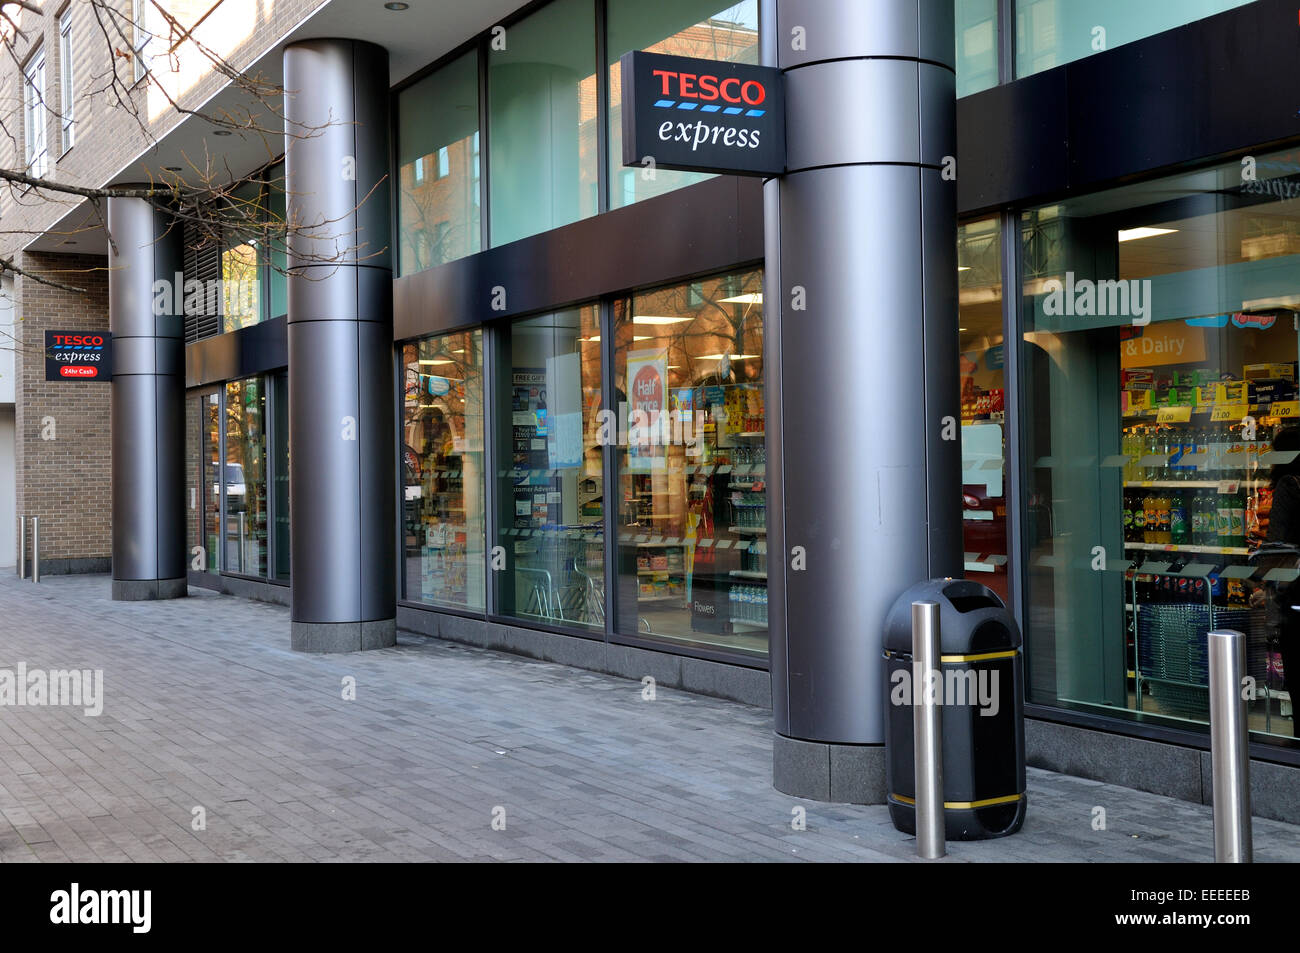 Tesco Express store in London docklands Canary Wharf Stock Photo